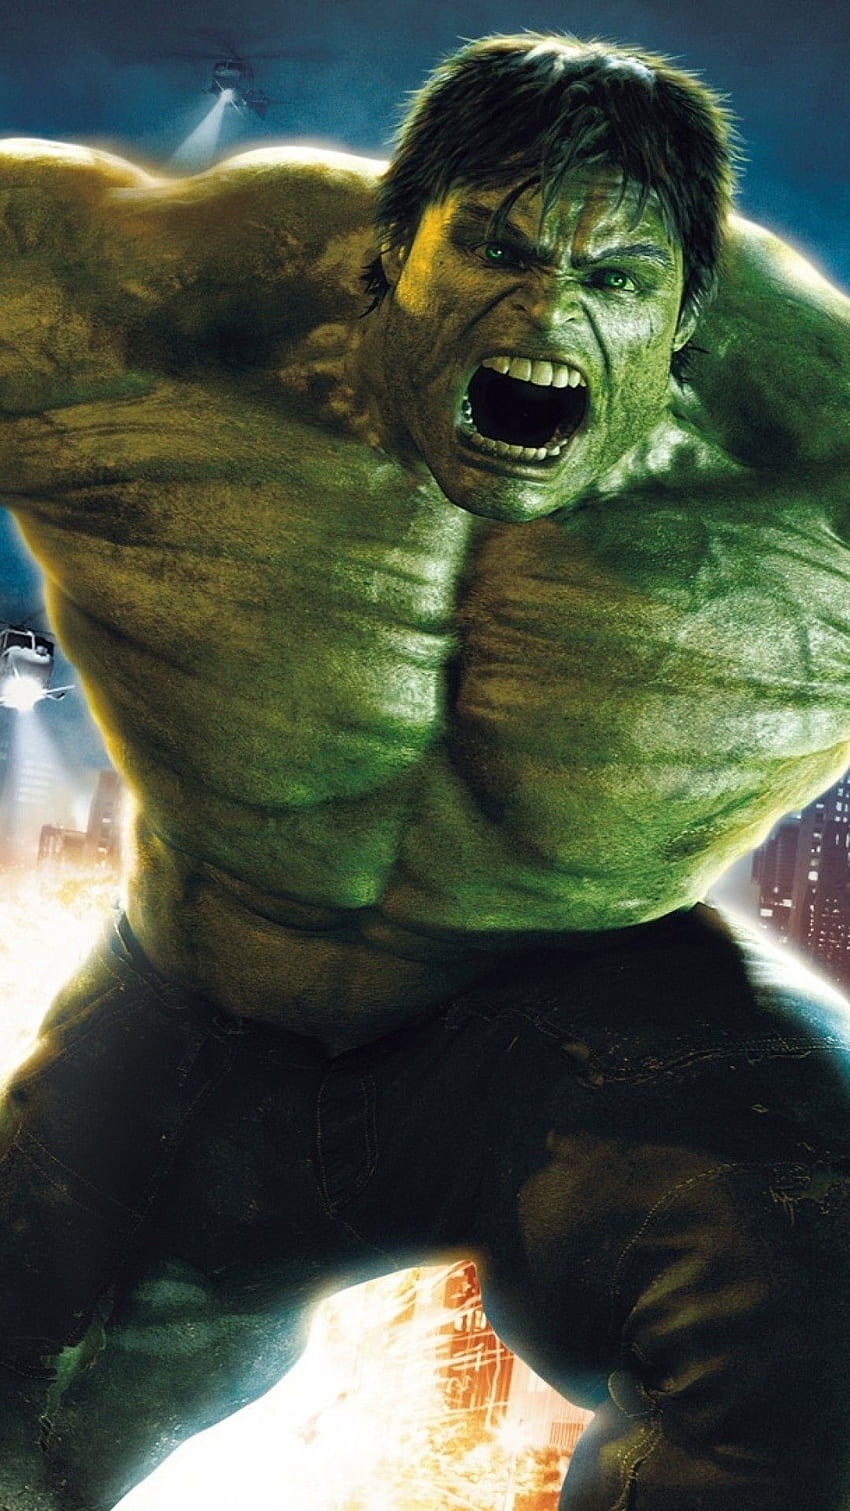 Hulk, Explosion, Marvel, Superhero for iPhone 8, iPhone 7 Plus, iPhone 6+, Sony Xperia Z, HTC One HD phone wallpaper